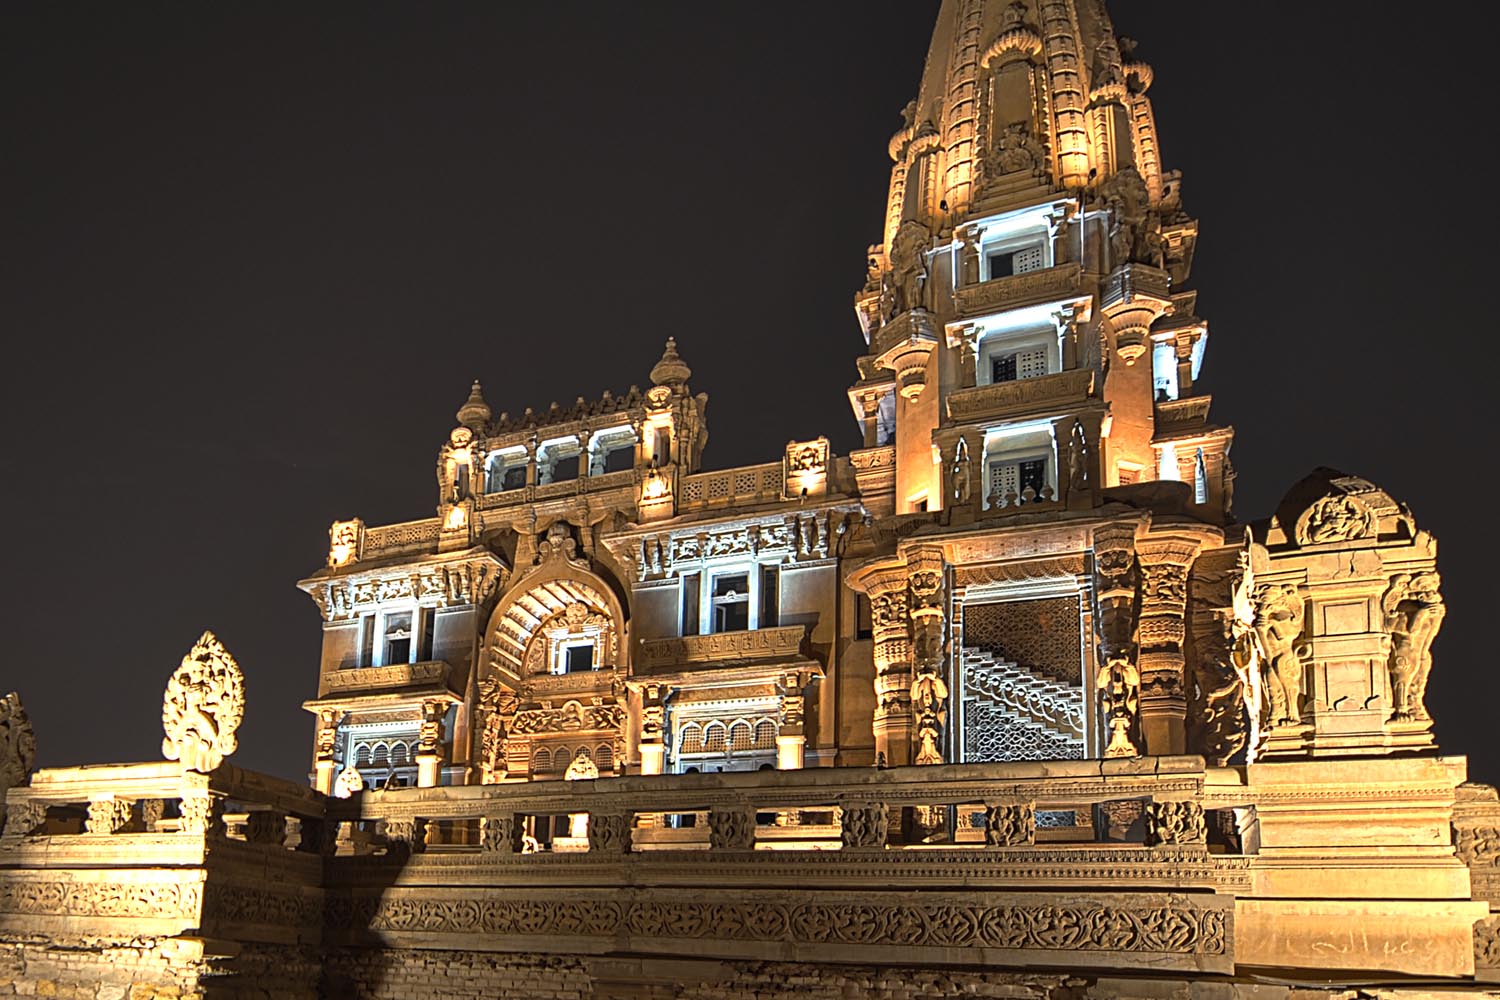 Fully Revamped Baron Empain Palace to Start Welcoming Visitors in